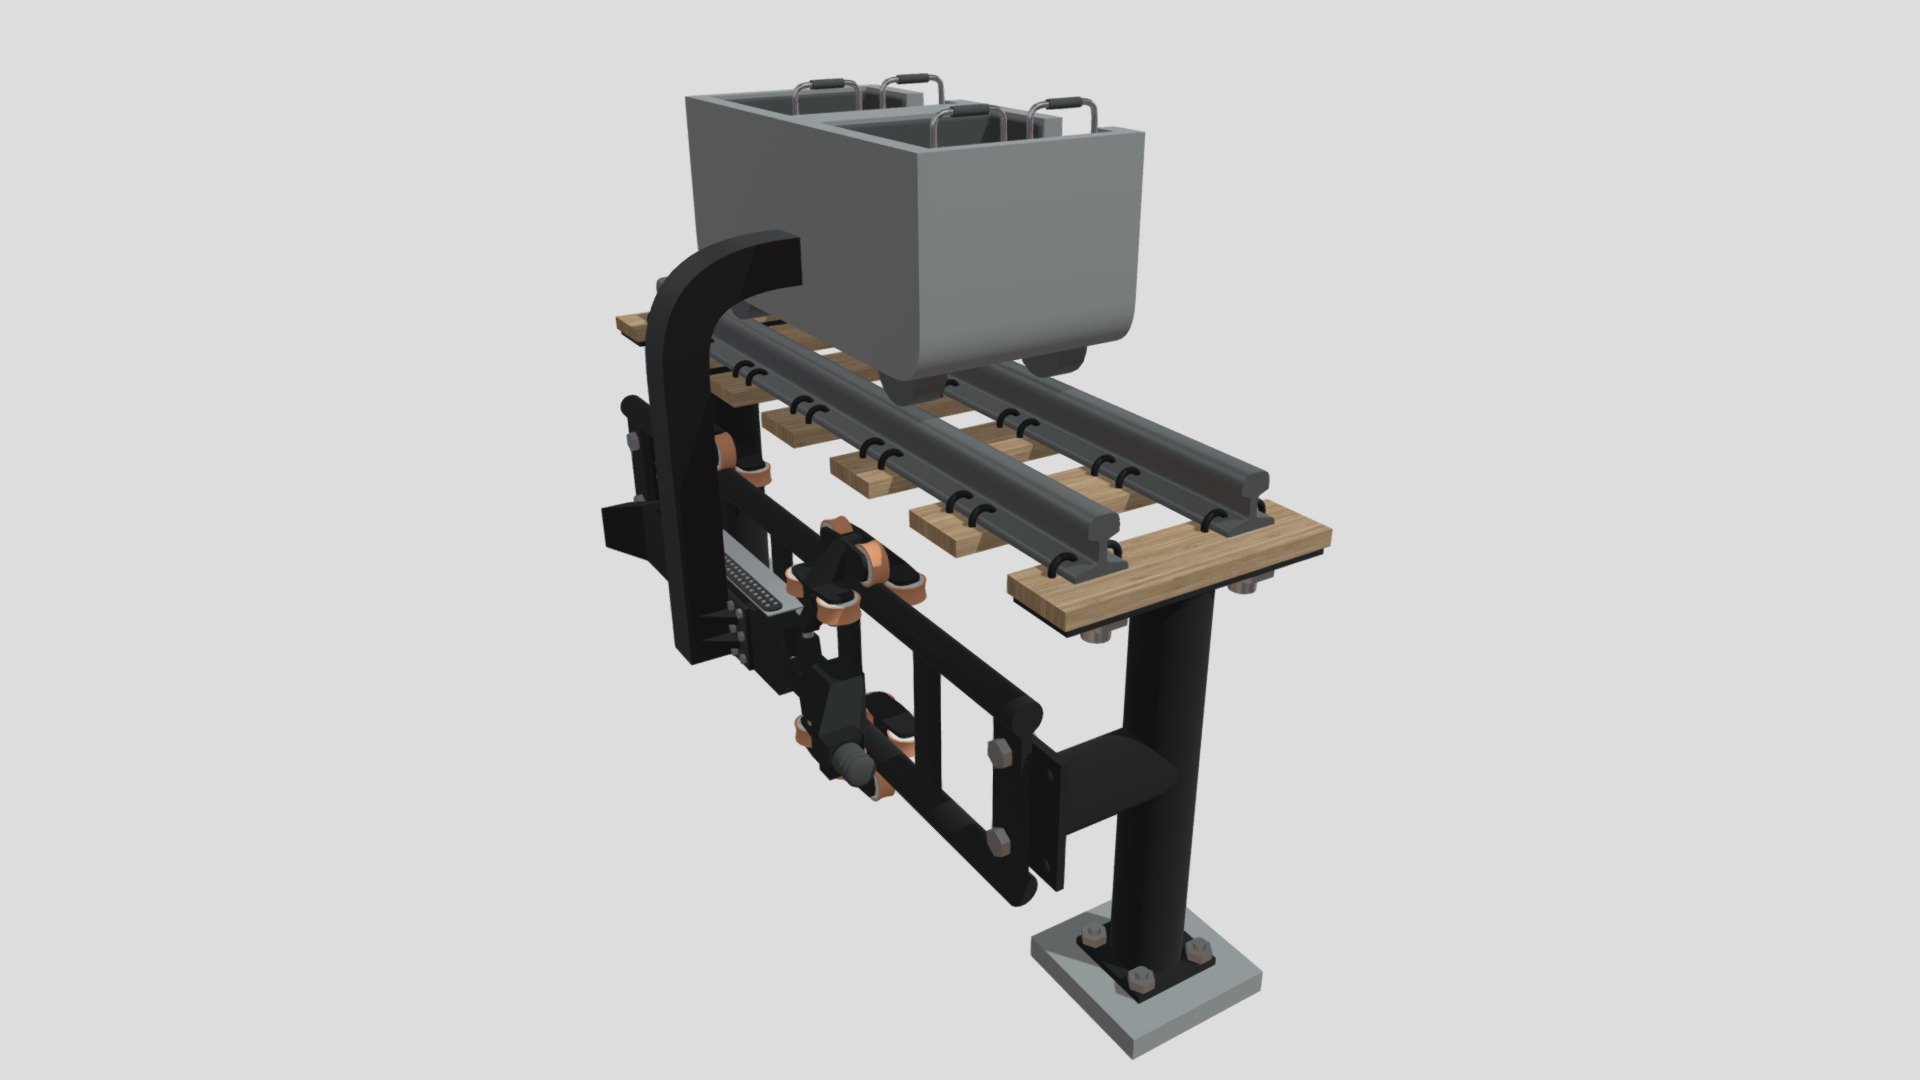 I made a model of a roller coaster car for a boom coaster.

If you want to see what a boom coaster looks like in real life check out the donkey kong ride at universal 3d model